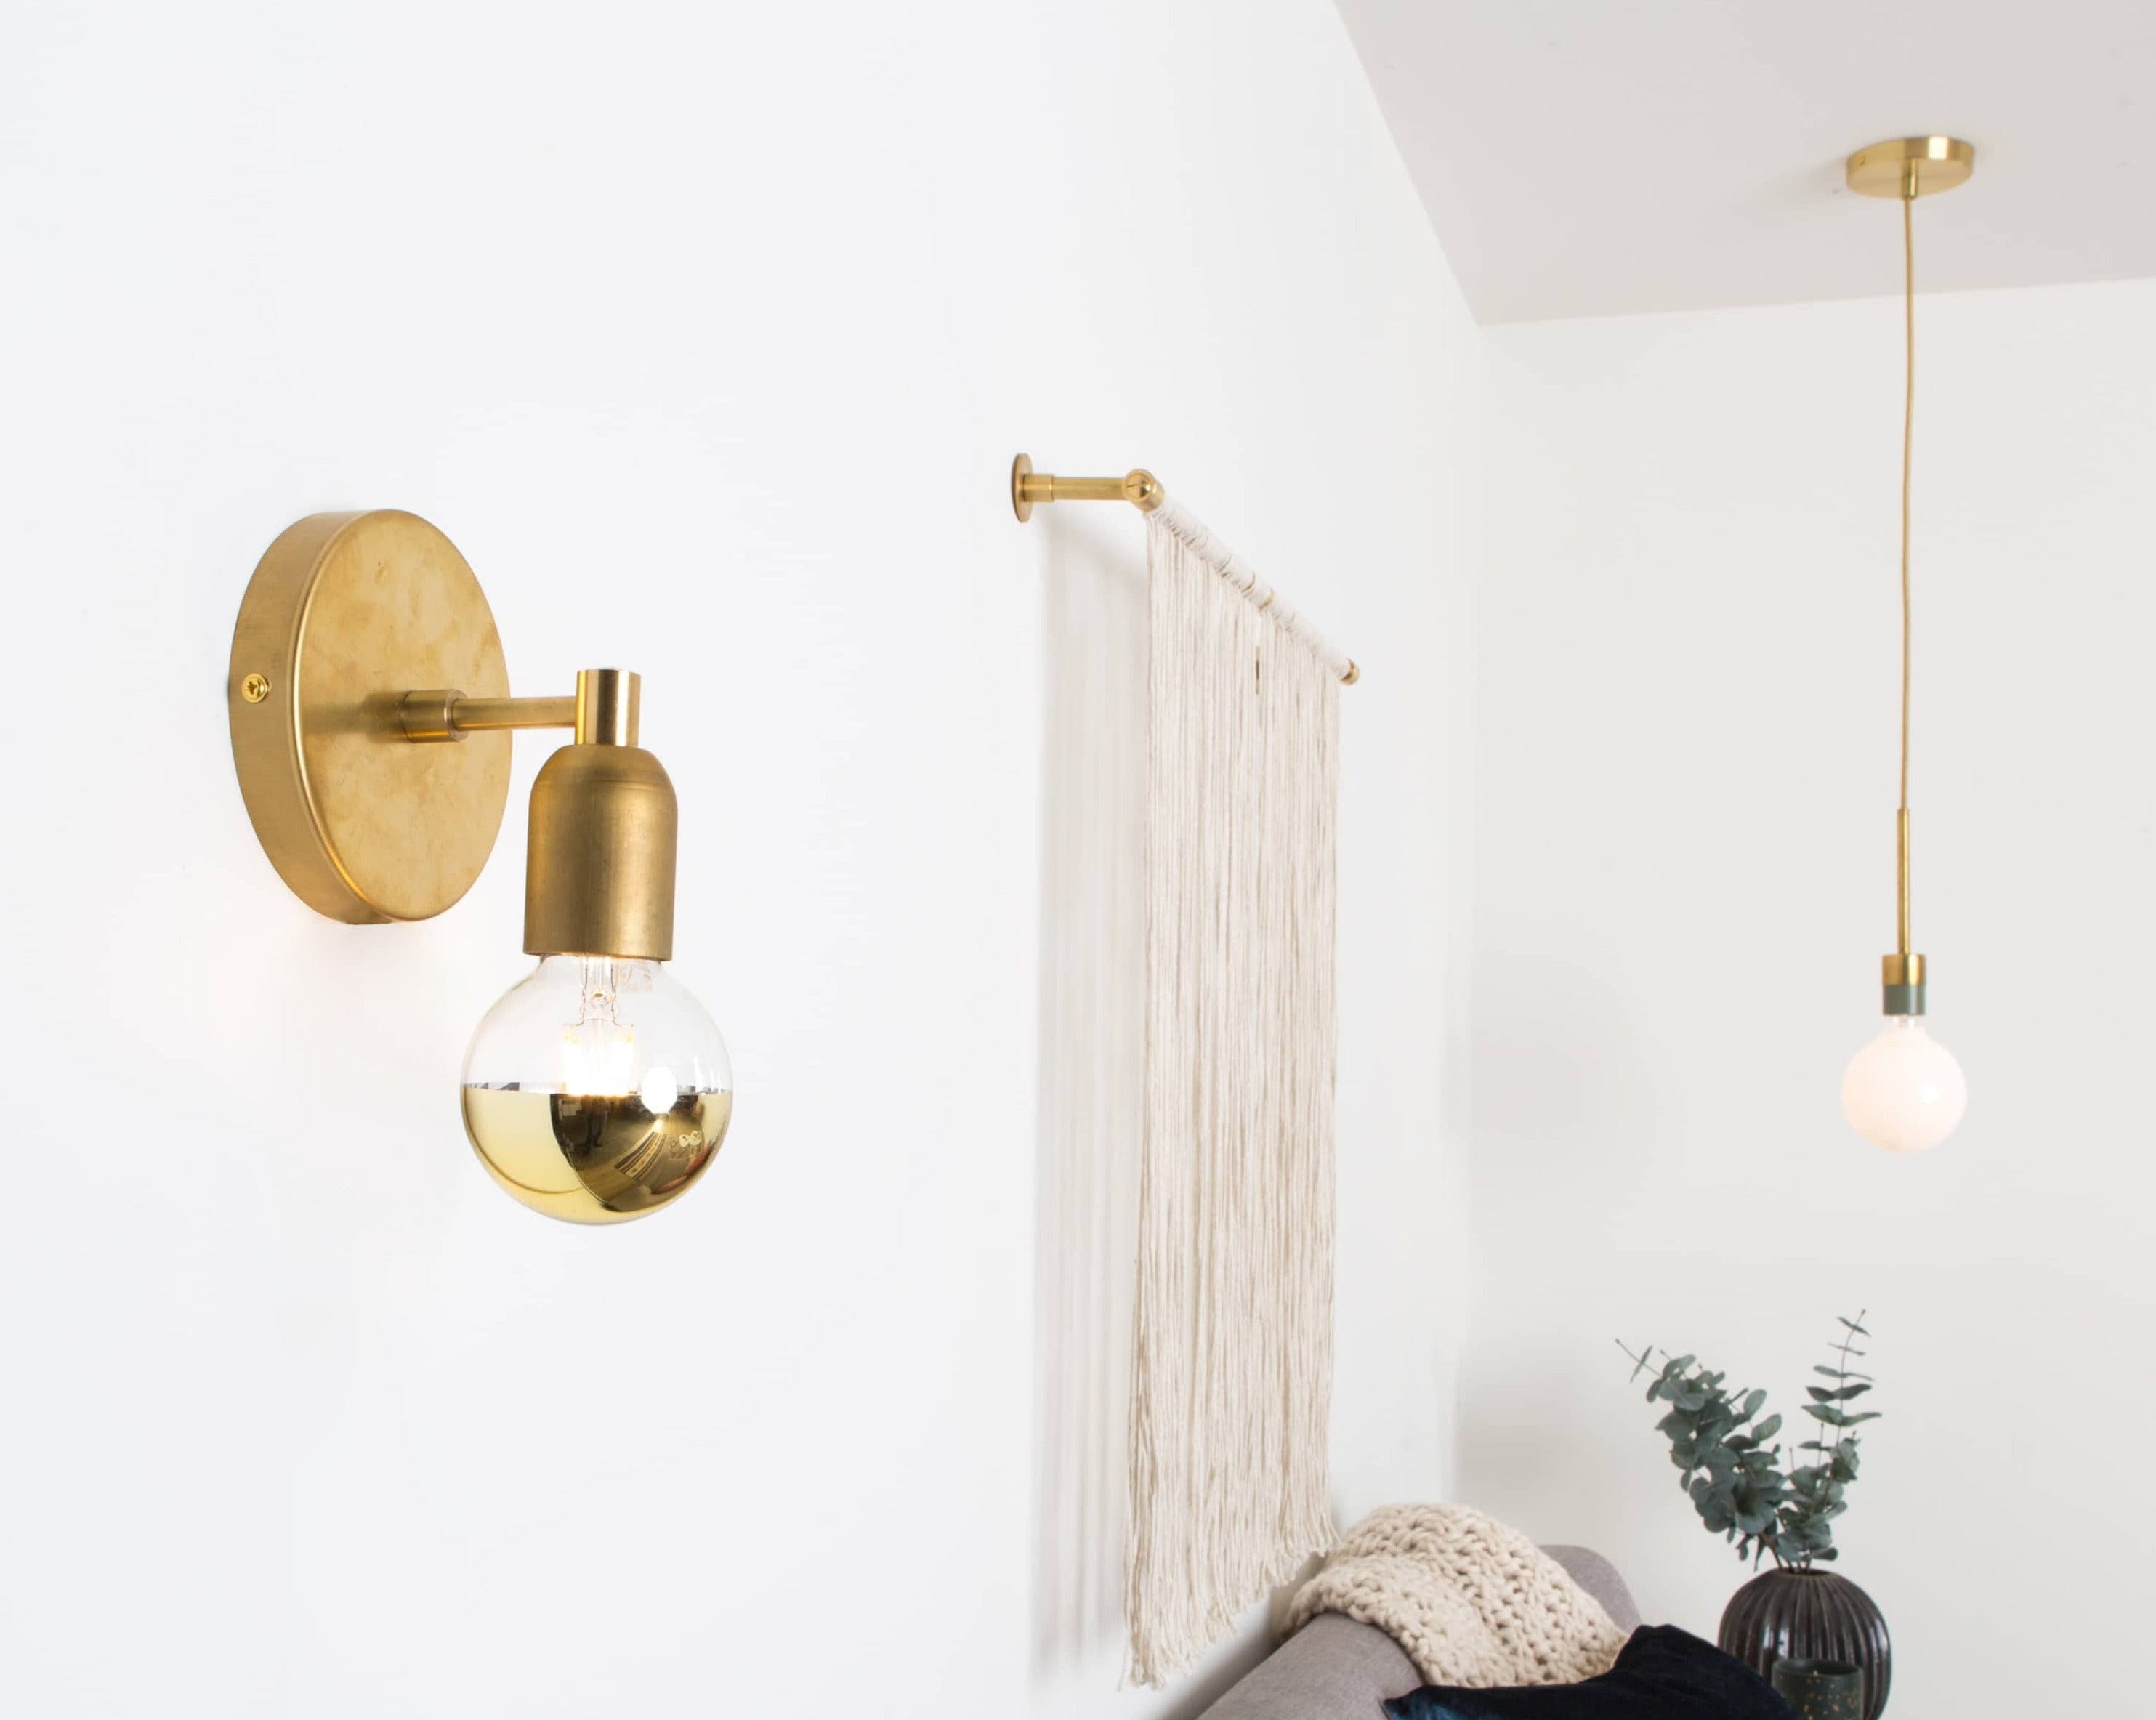 Junction Mini Solo Sconce in Raw Brass finish mounted on wall next to string art piece.